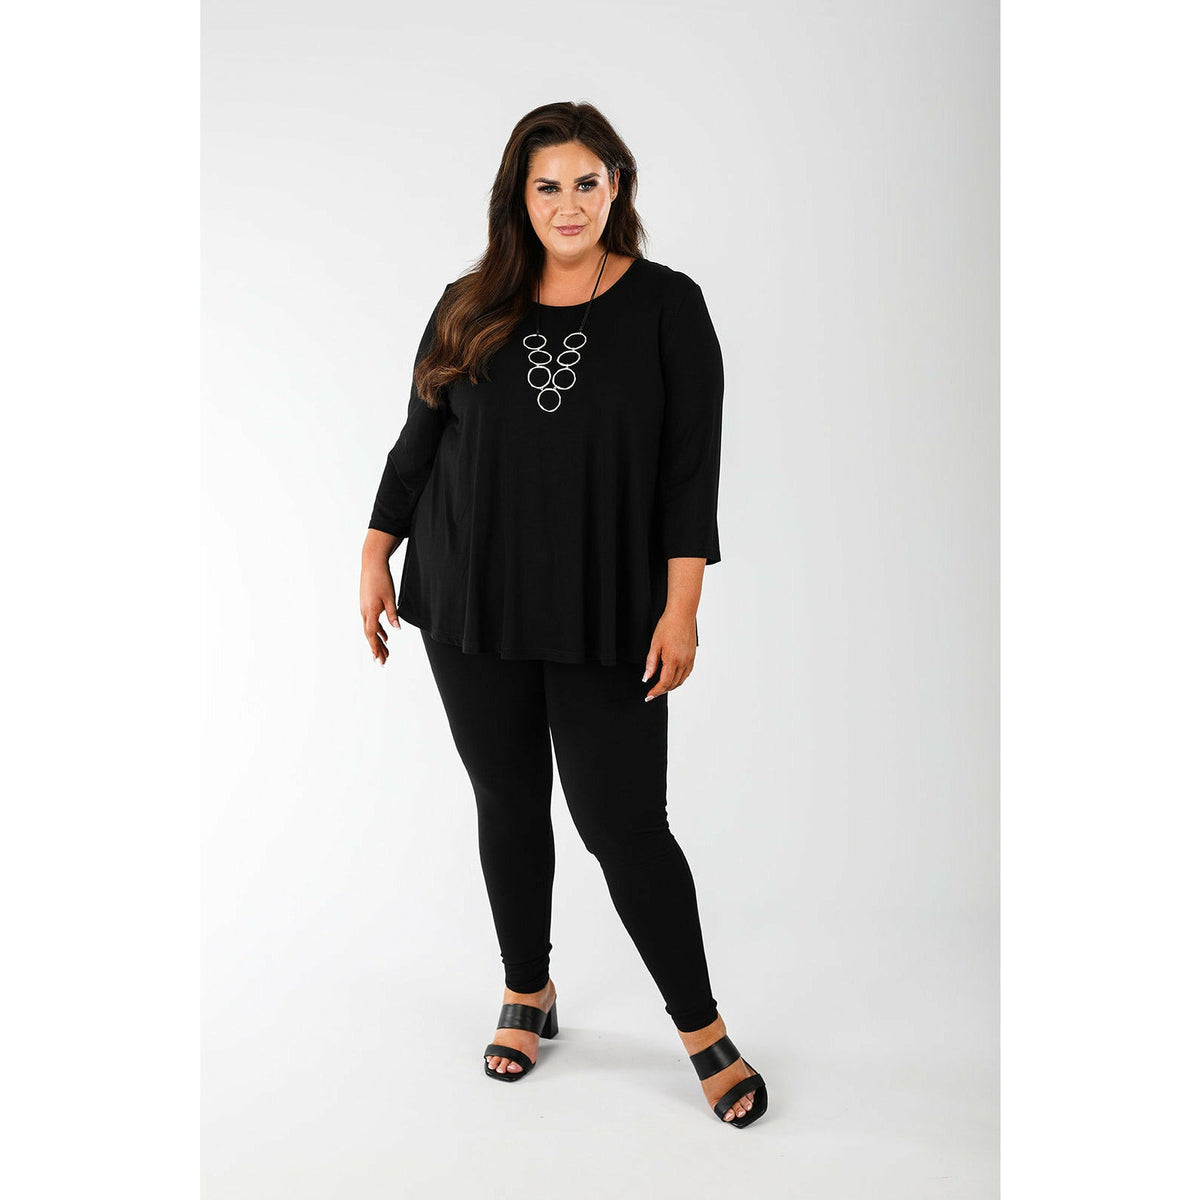 New Cuts Plus Size , All Sizes Womens Black Legging and Tights Plus Size  and Regular Size Rocker Cut Leggings -  Denmark